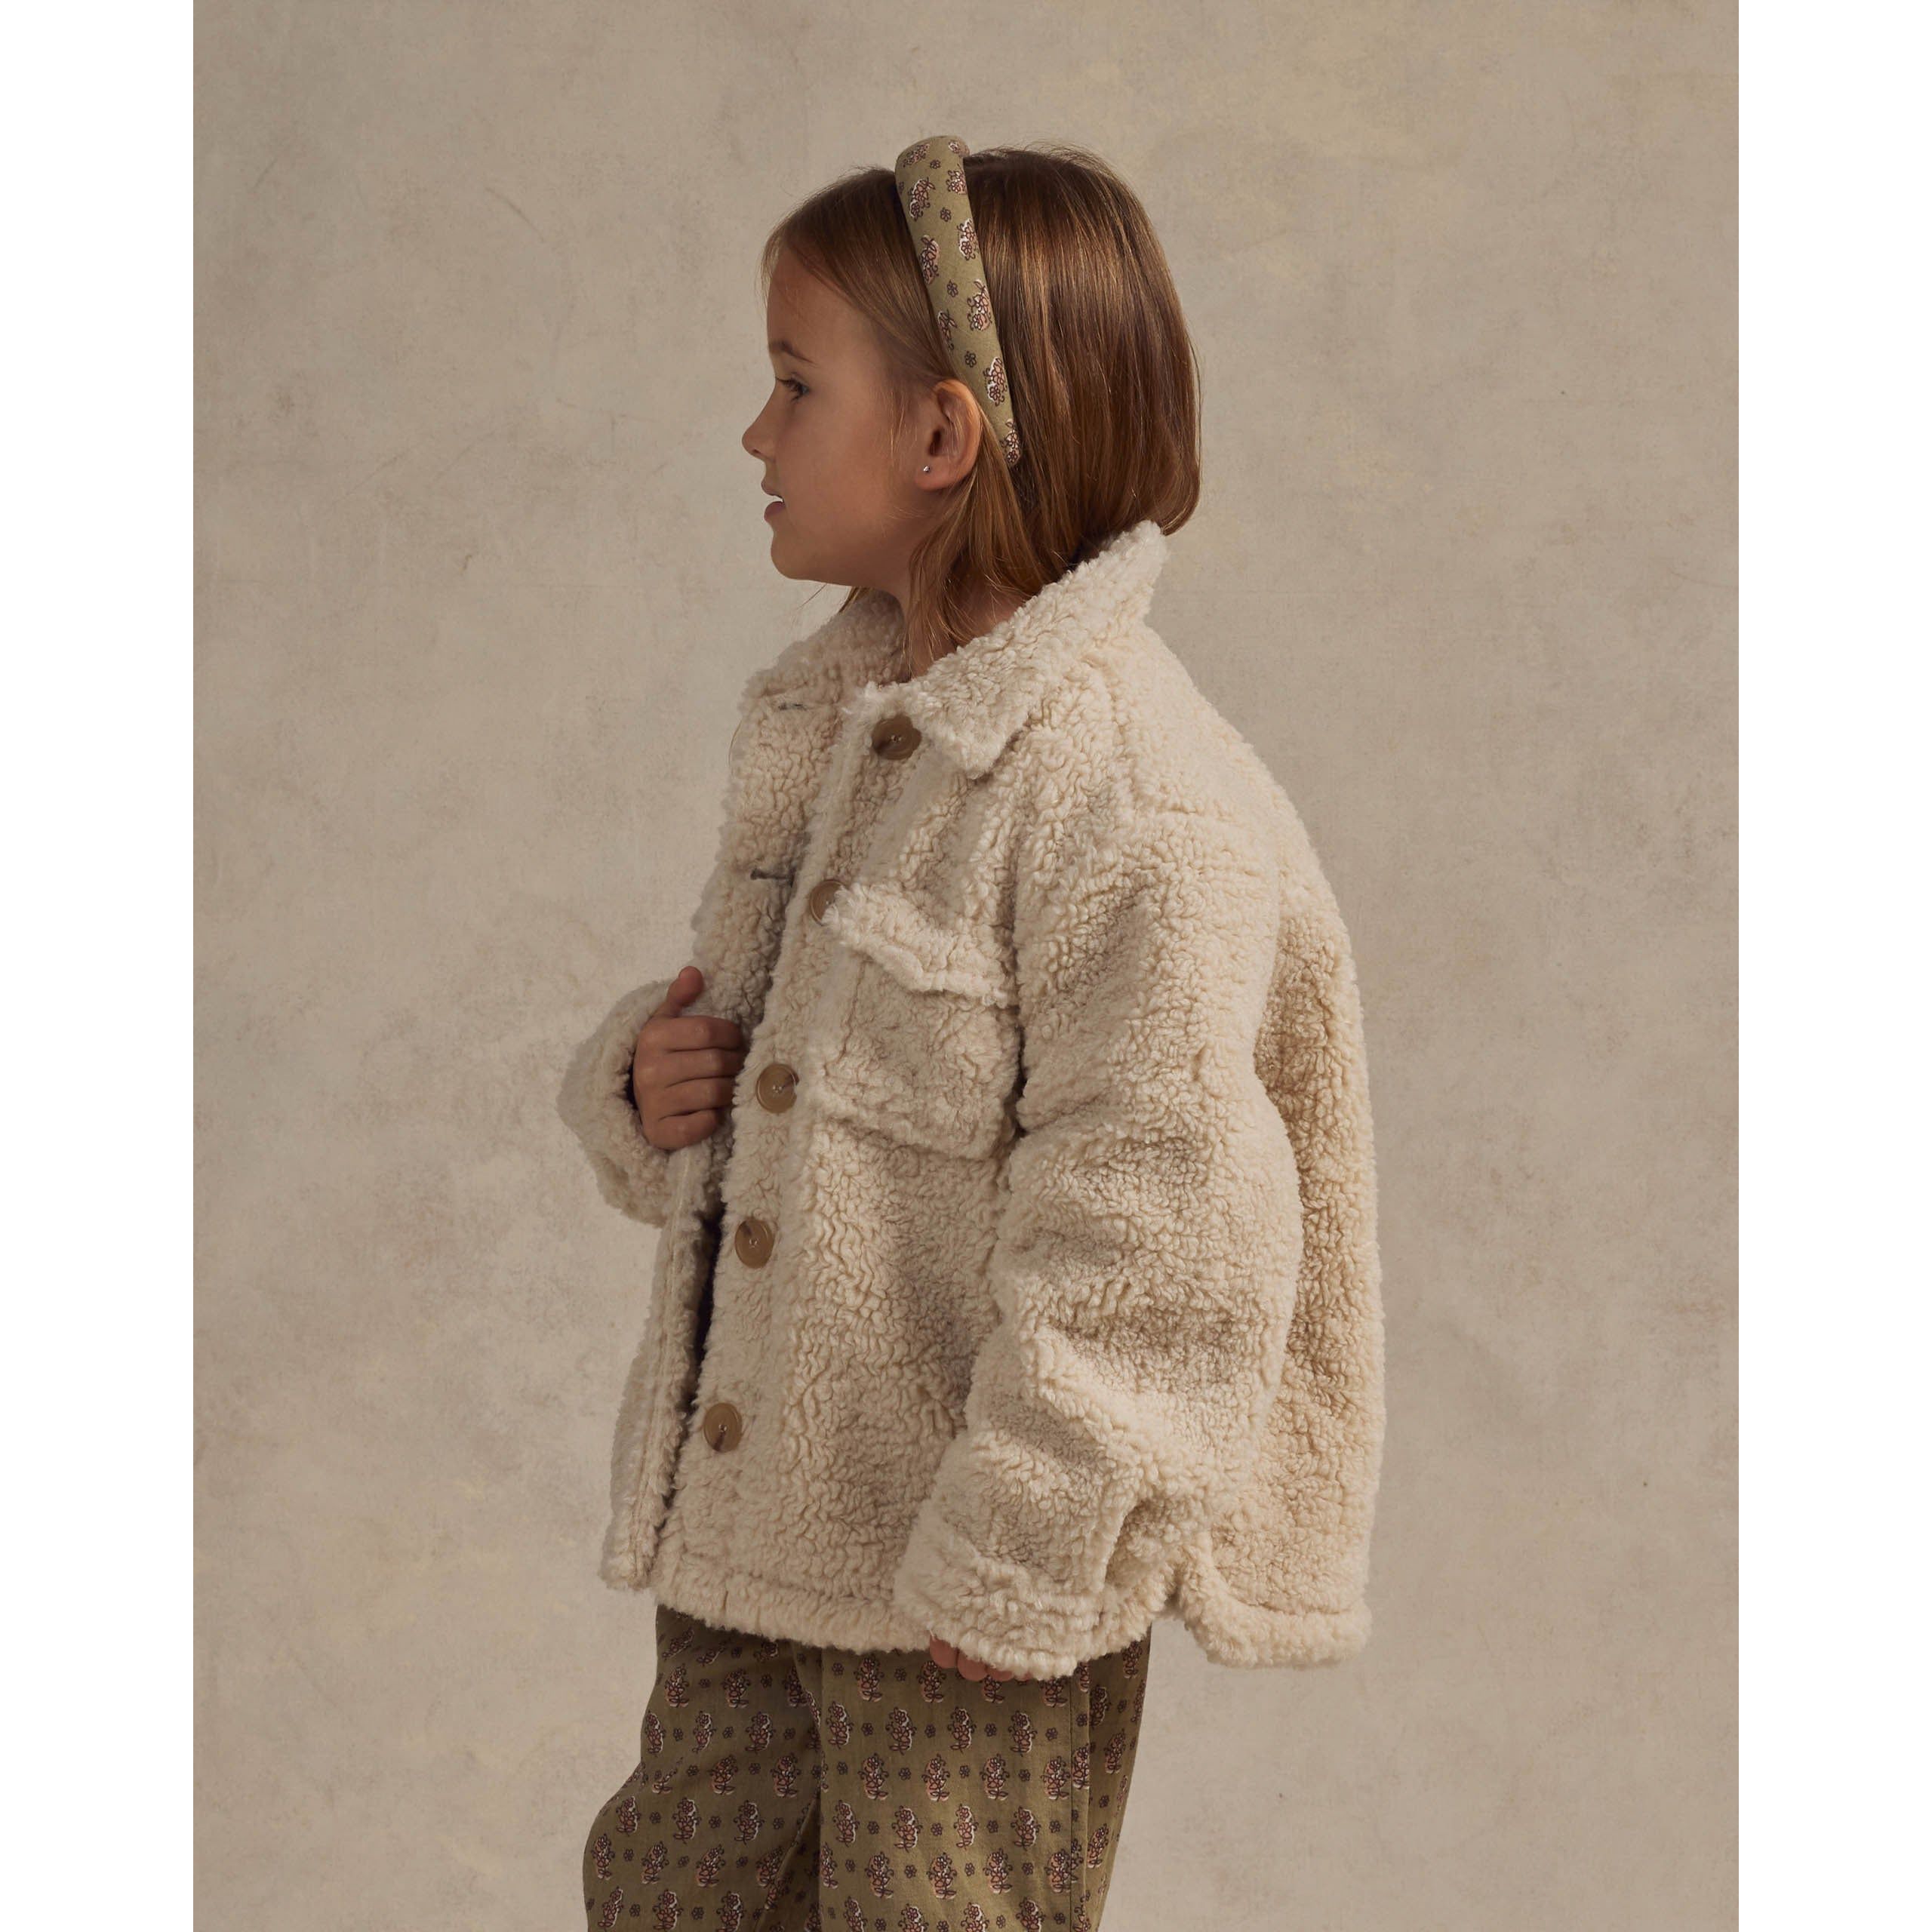 girl wearing cream colored fleece chore coat with buttons